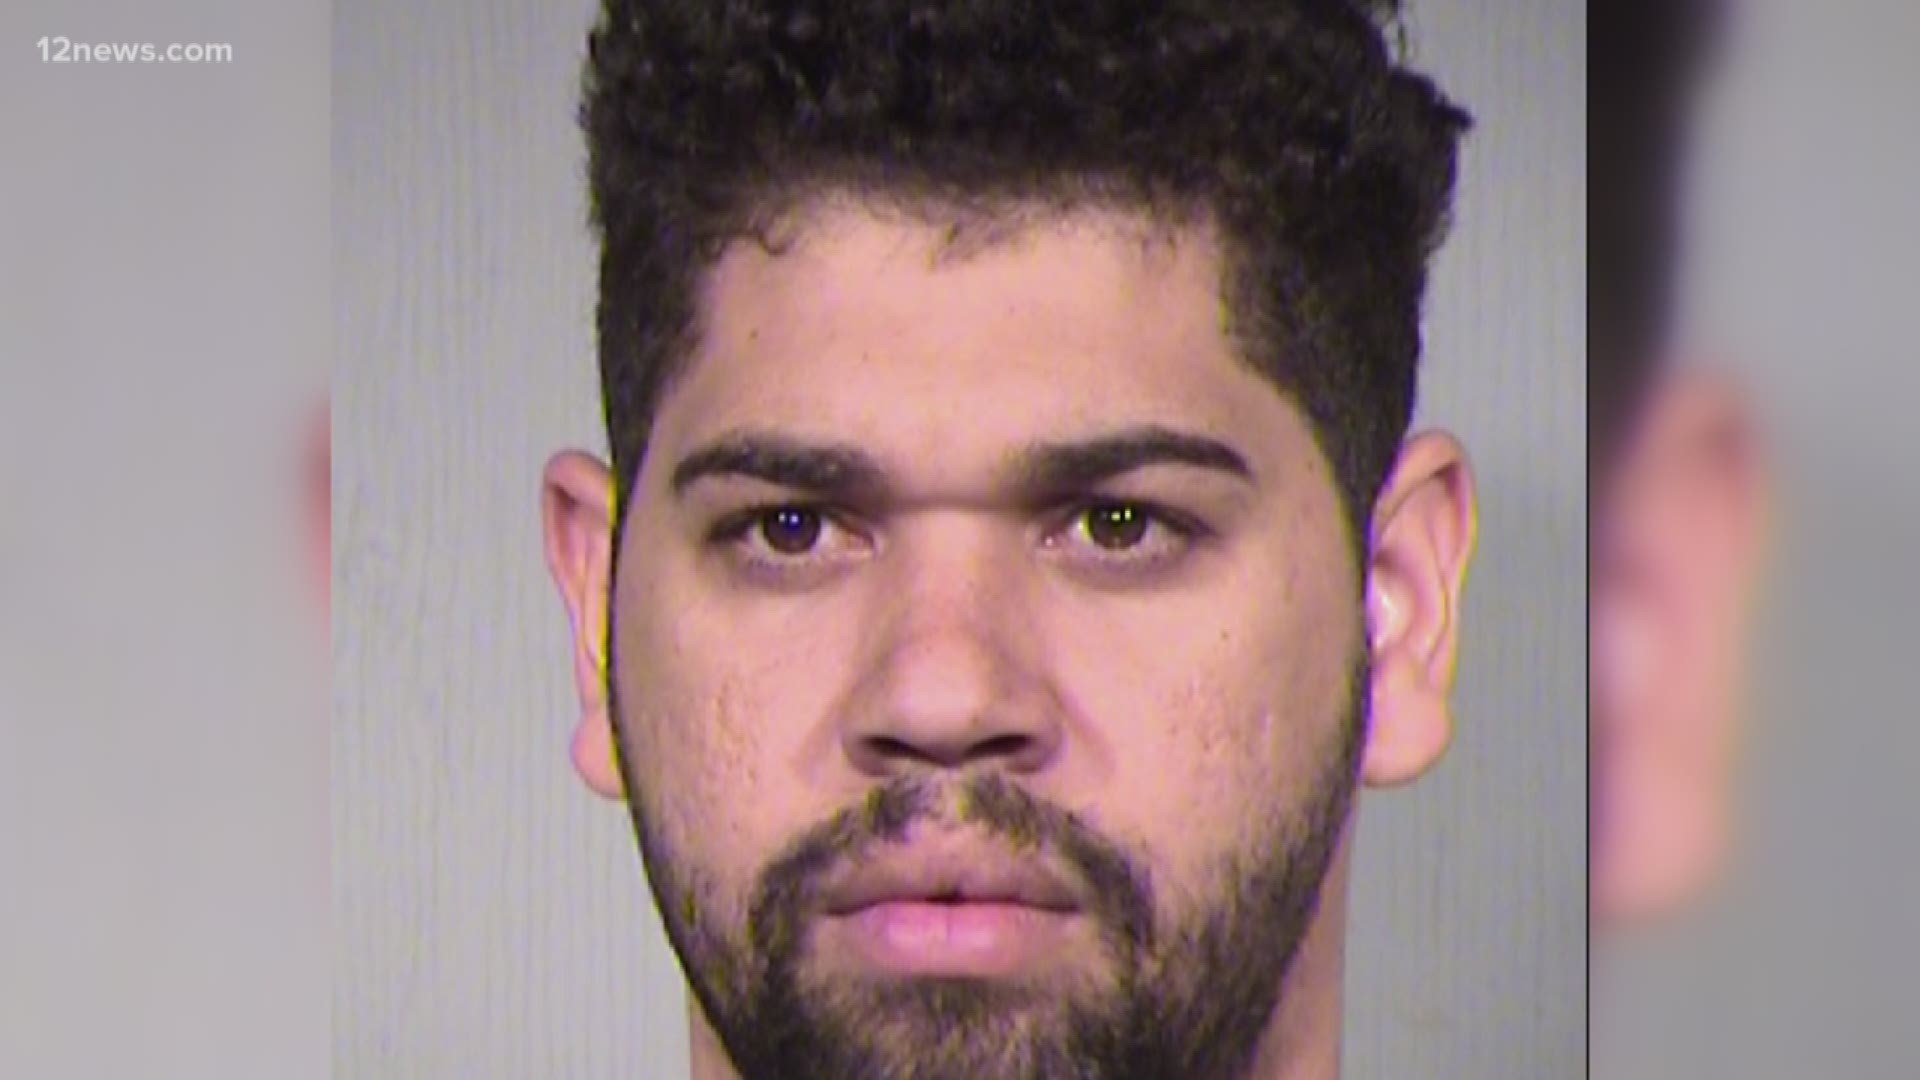 Fernando Magaz Negrete is accused of inappropriately touching a 14-year-old girl being housed at the Southwest Key facility. Her roommates told investigators that he had gone into the room multiple times June 27 to kiss and touch the girl.